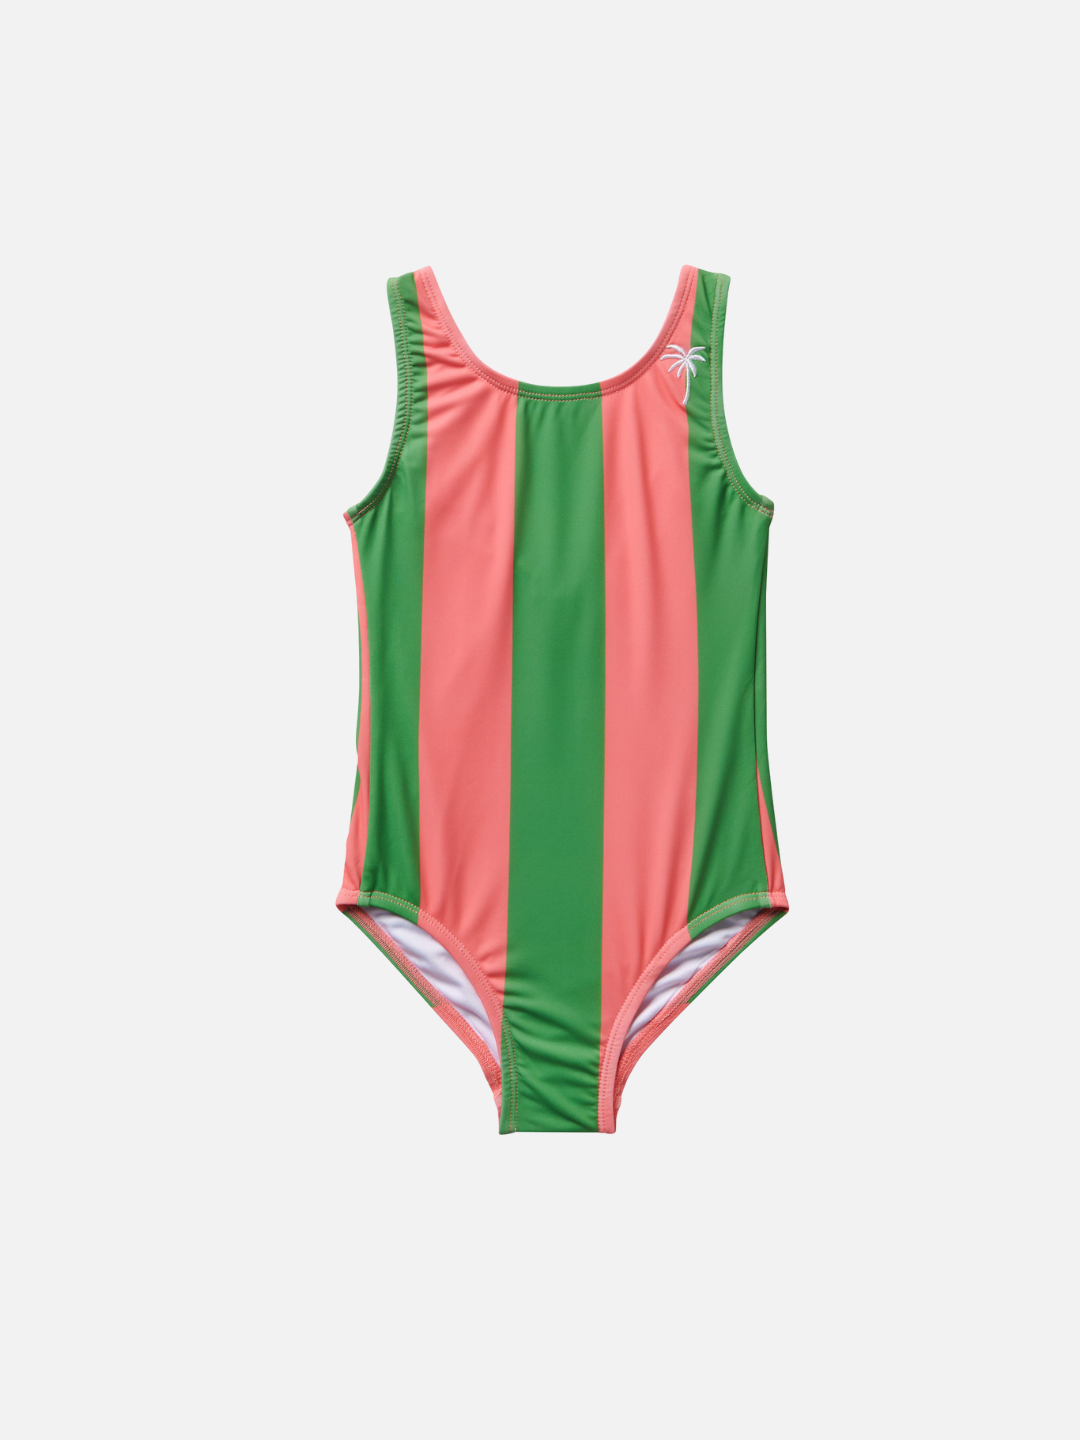 A front view of the Retro Stripe Swimsuit in Watermelon. Palm Tree embroidery is on the left strap.